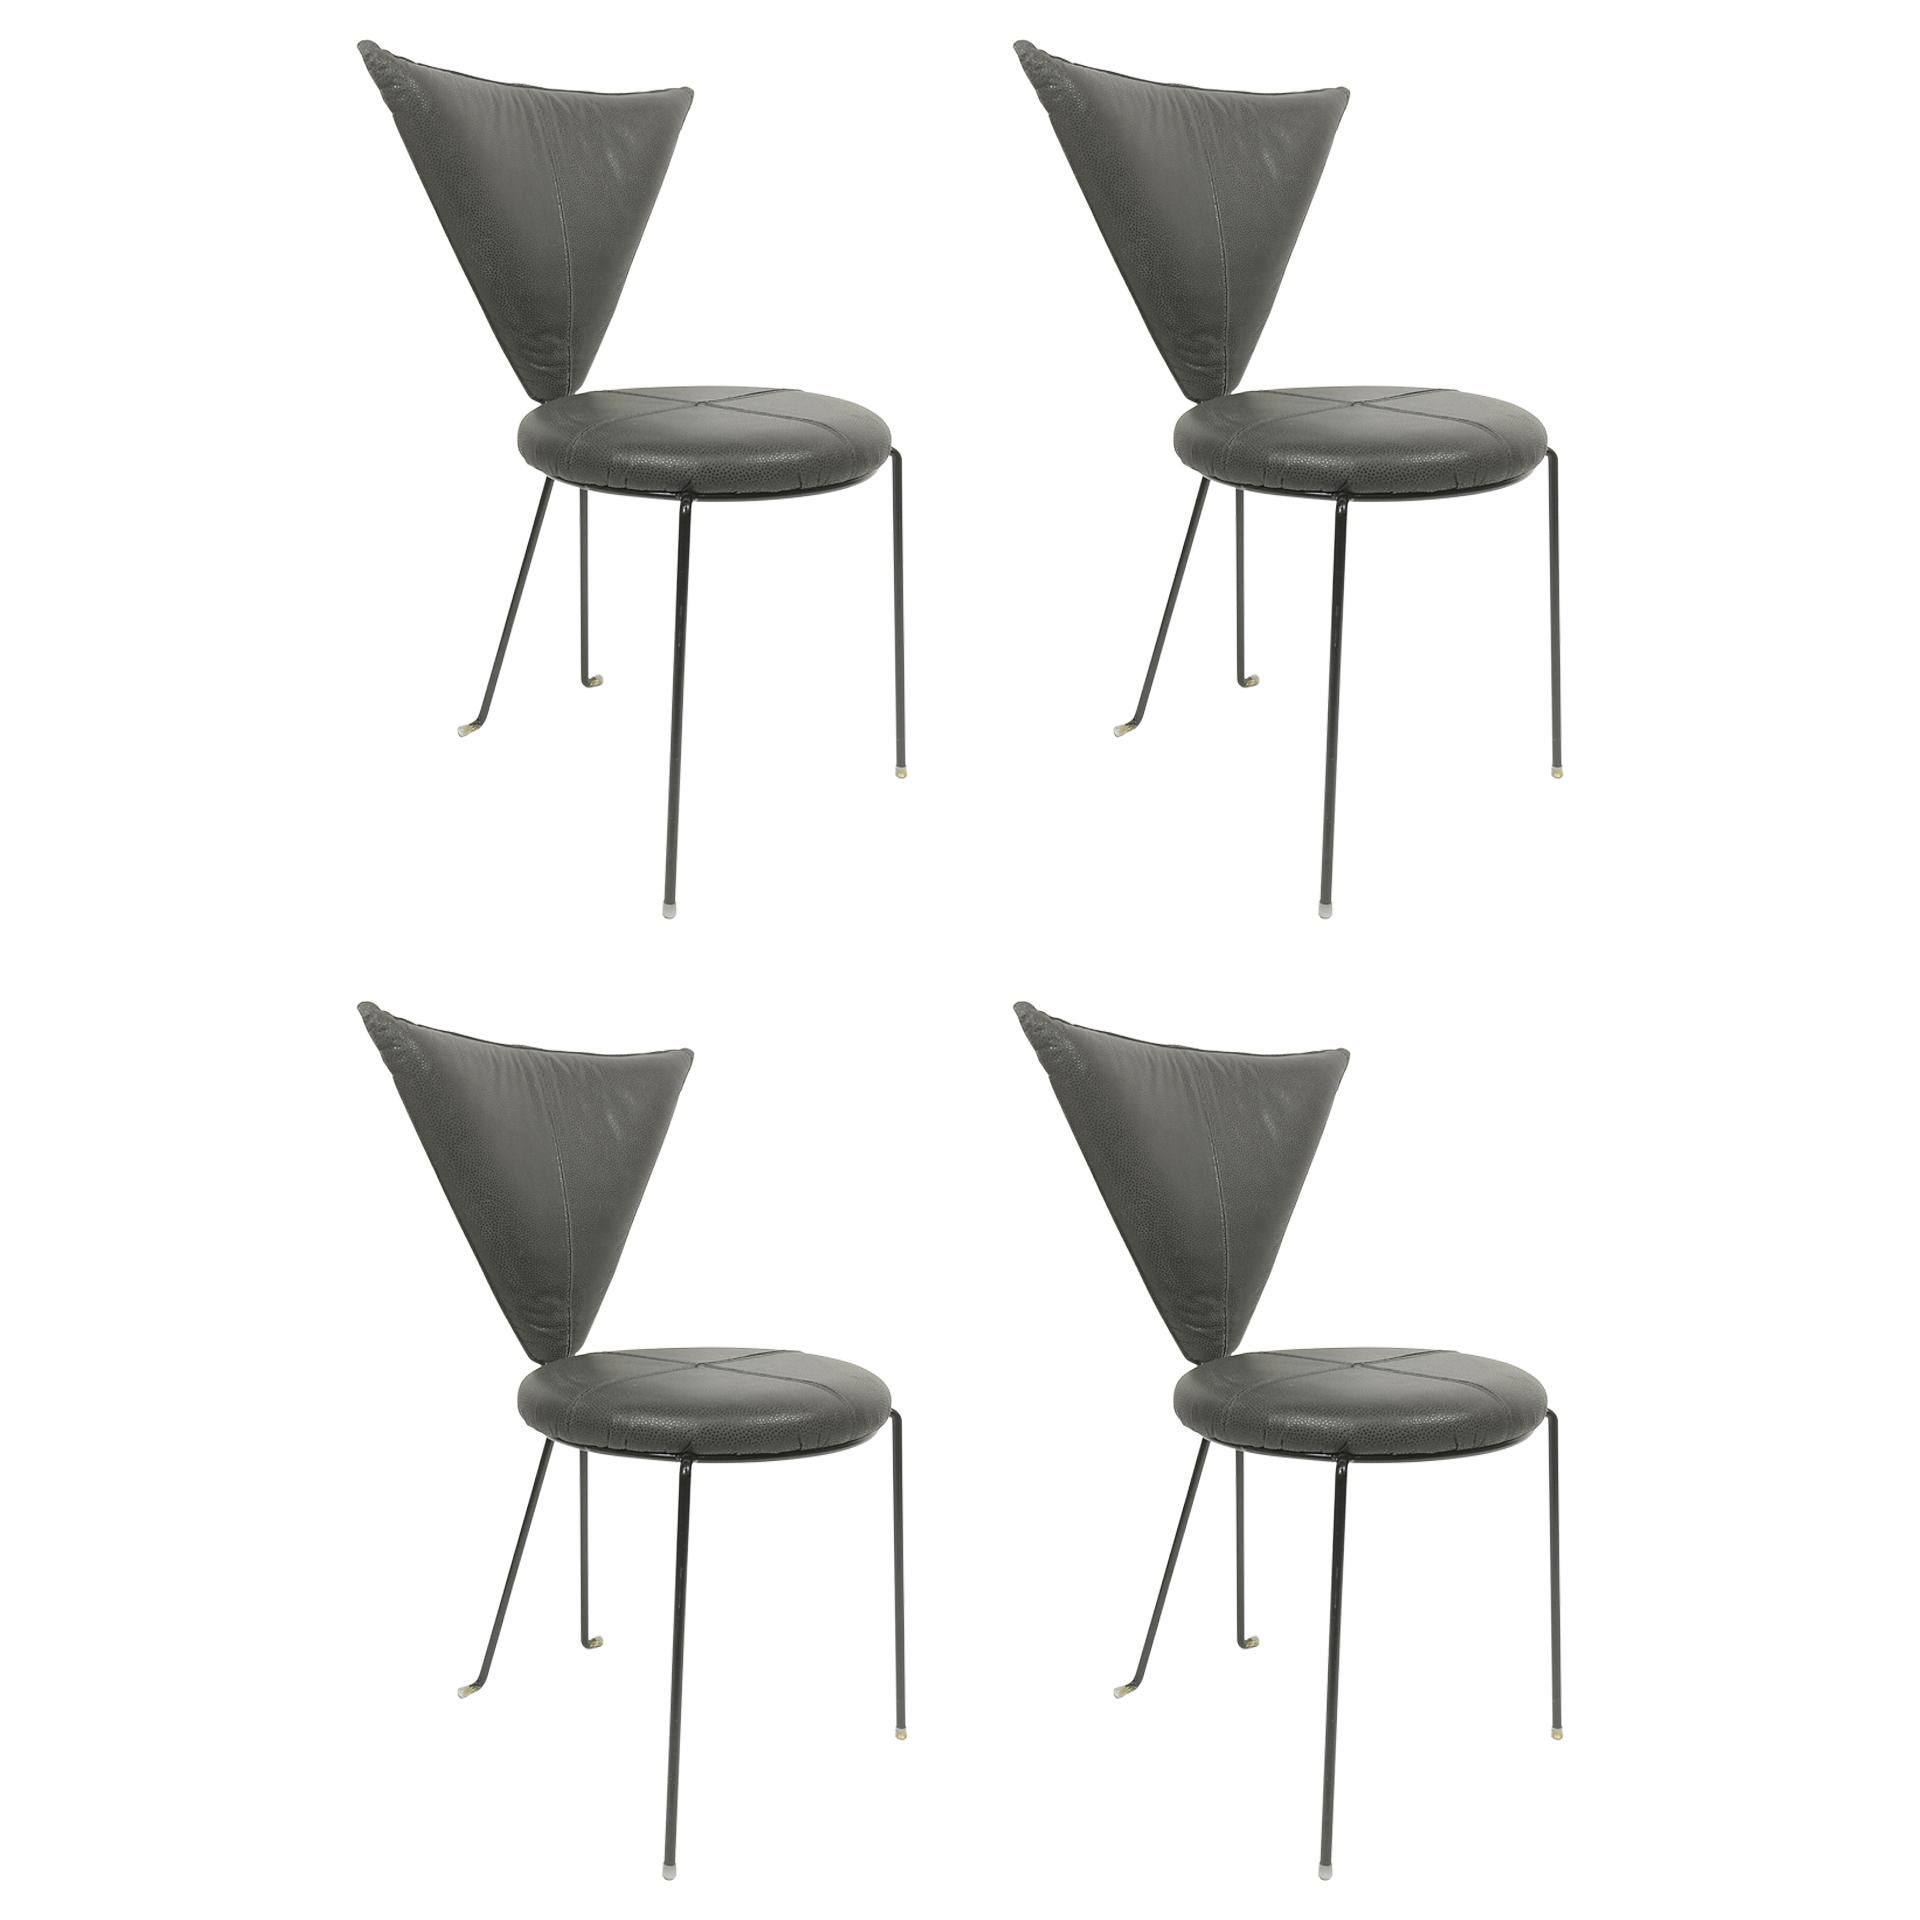 Rare Set of Four Black Leather and Painted Steel Chairs by Helmut Lubke & Co